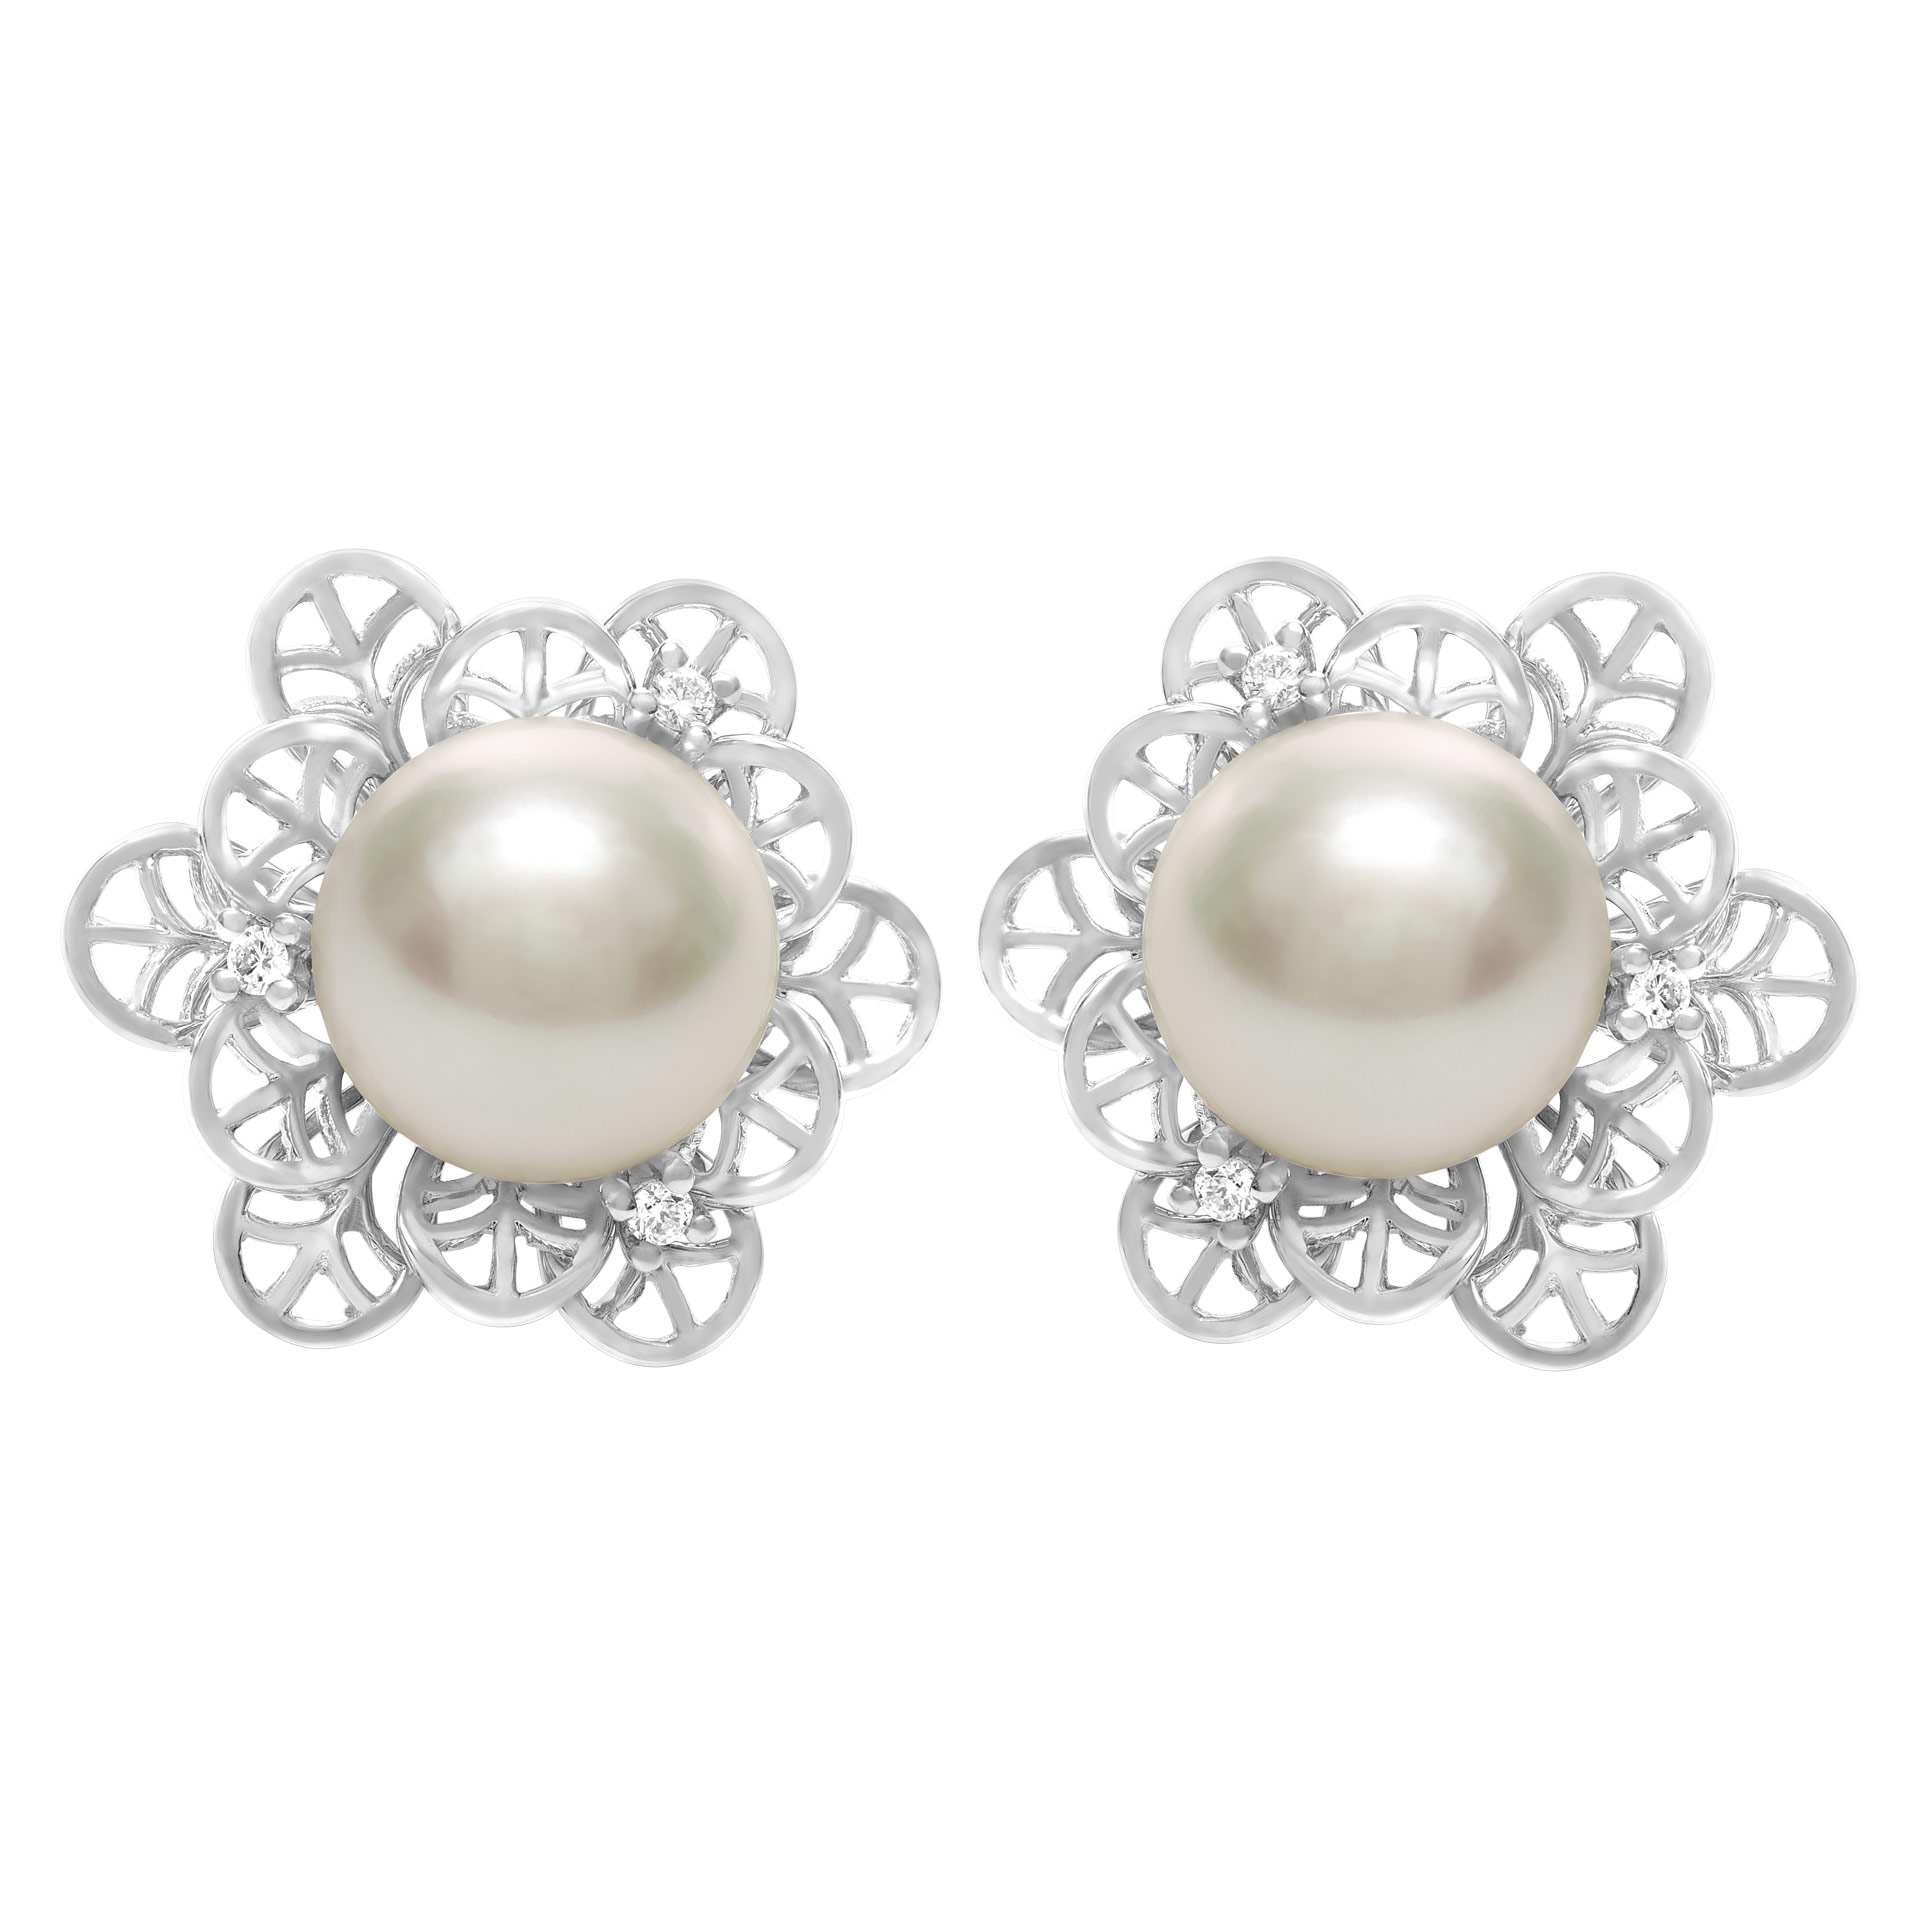 South Sea pearls earrings in 18k with diamond accents